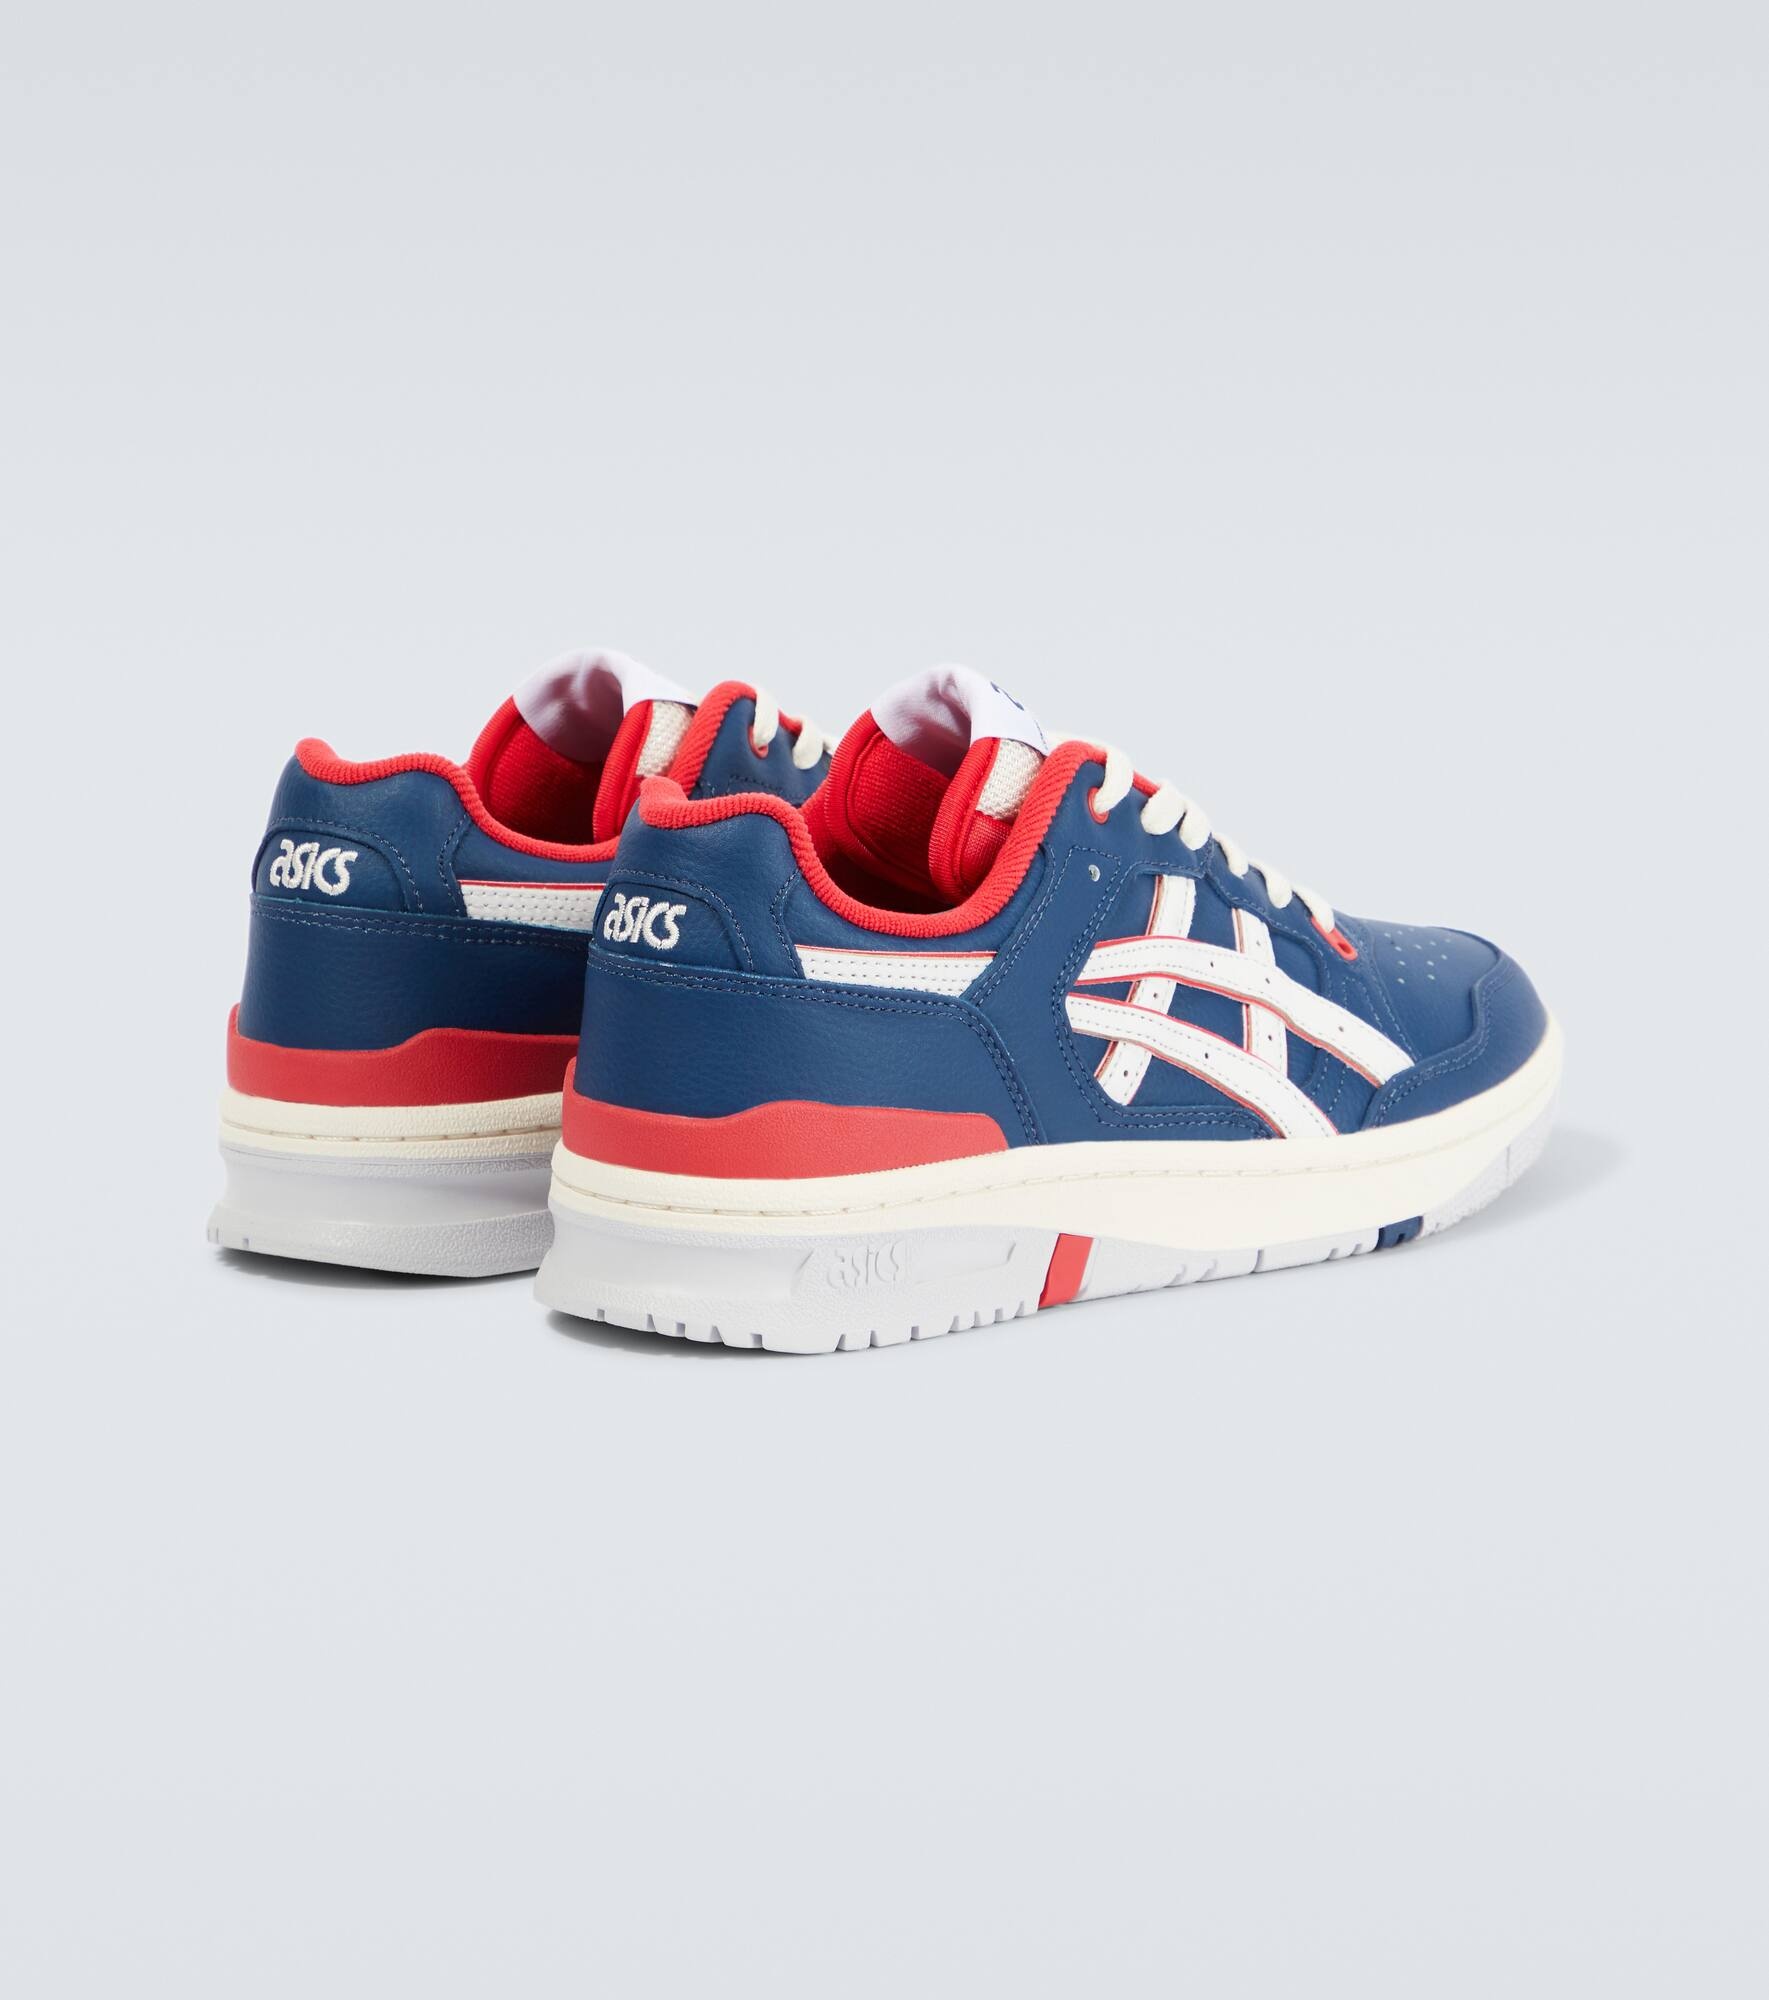 x Asics EX89 leather sneakers - 6